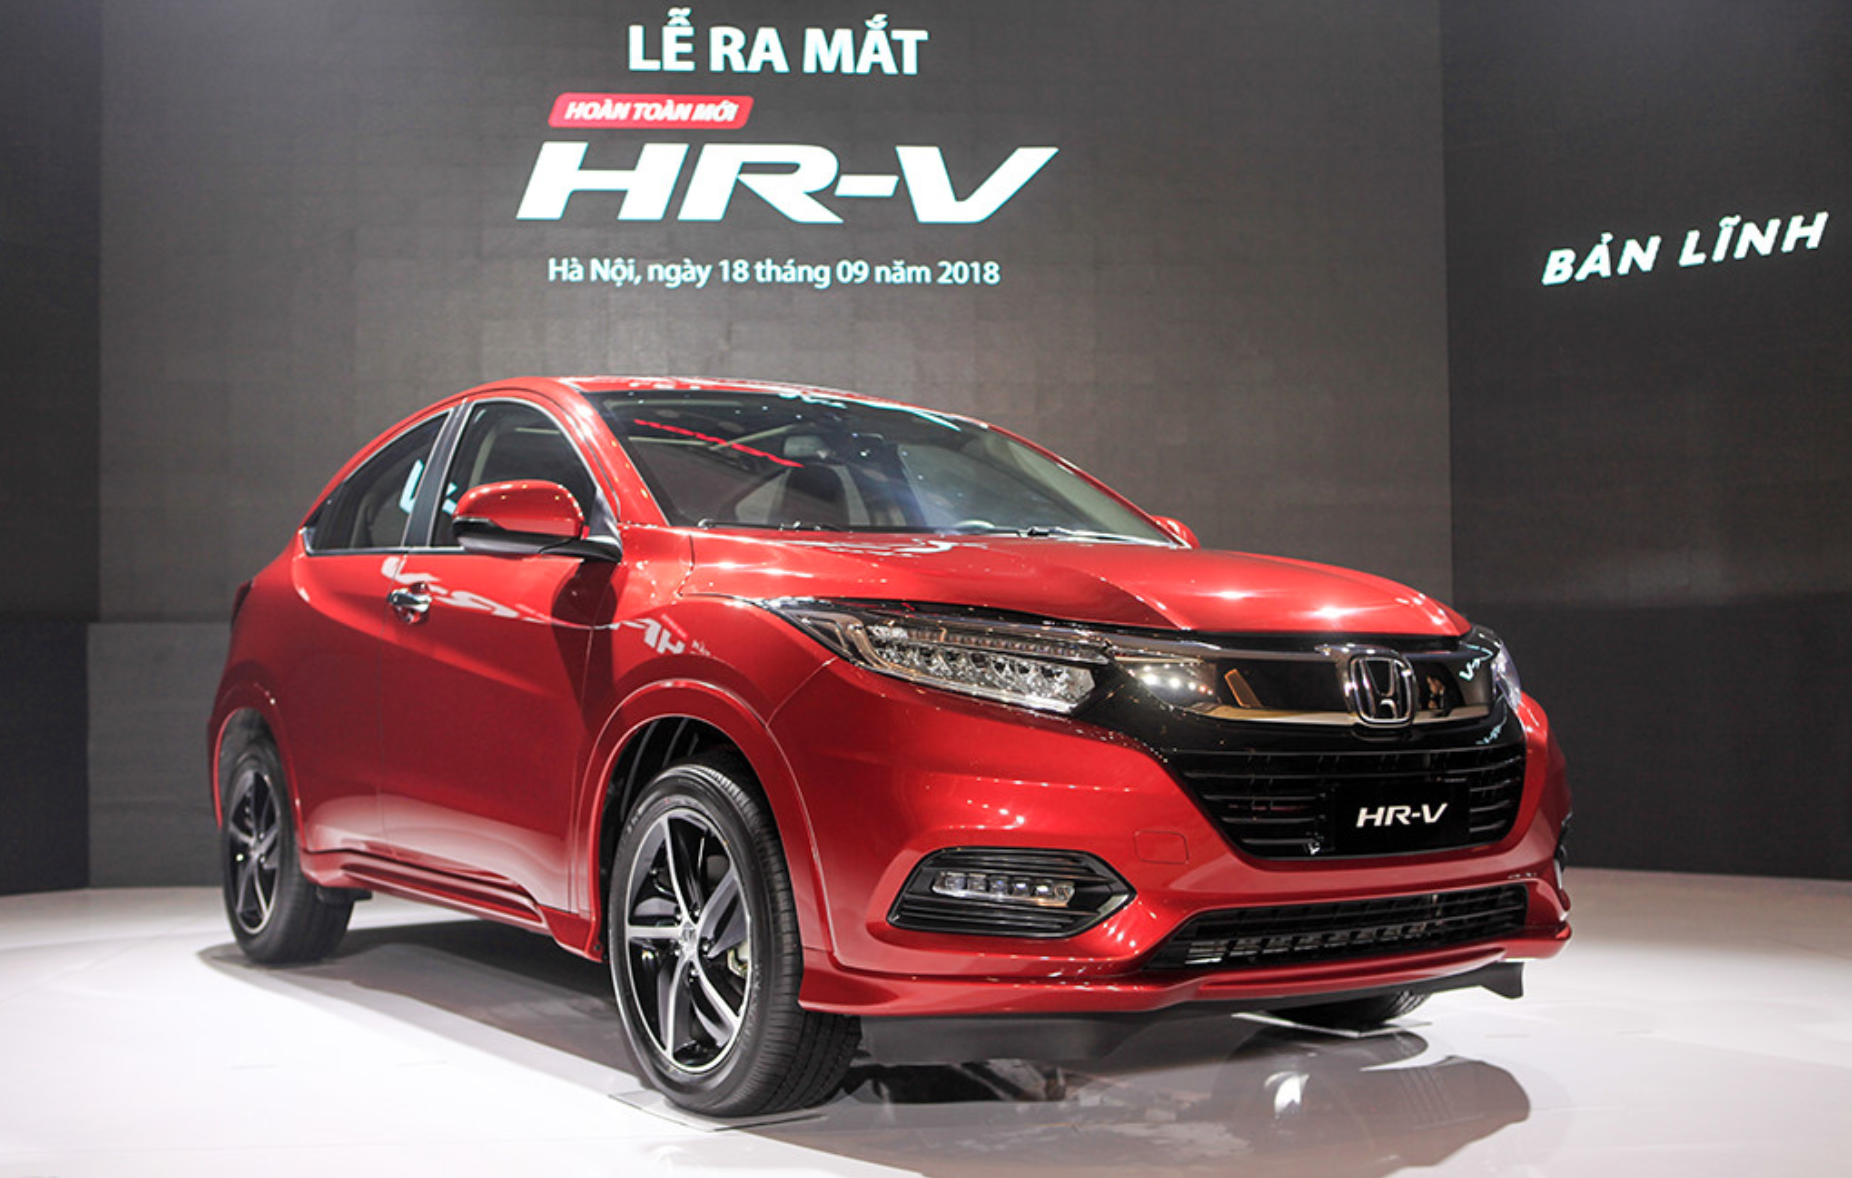 Honda HRV priced under 900 million dong is available at the dealer in Hanoi